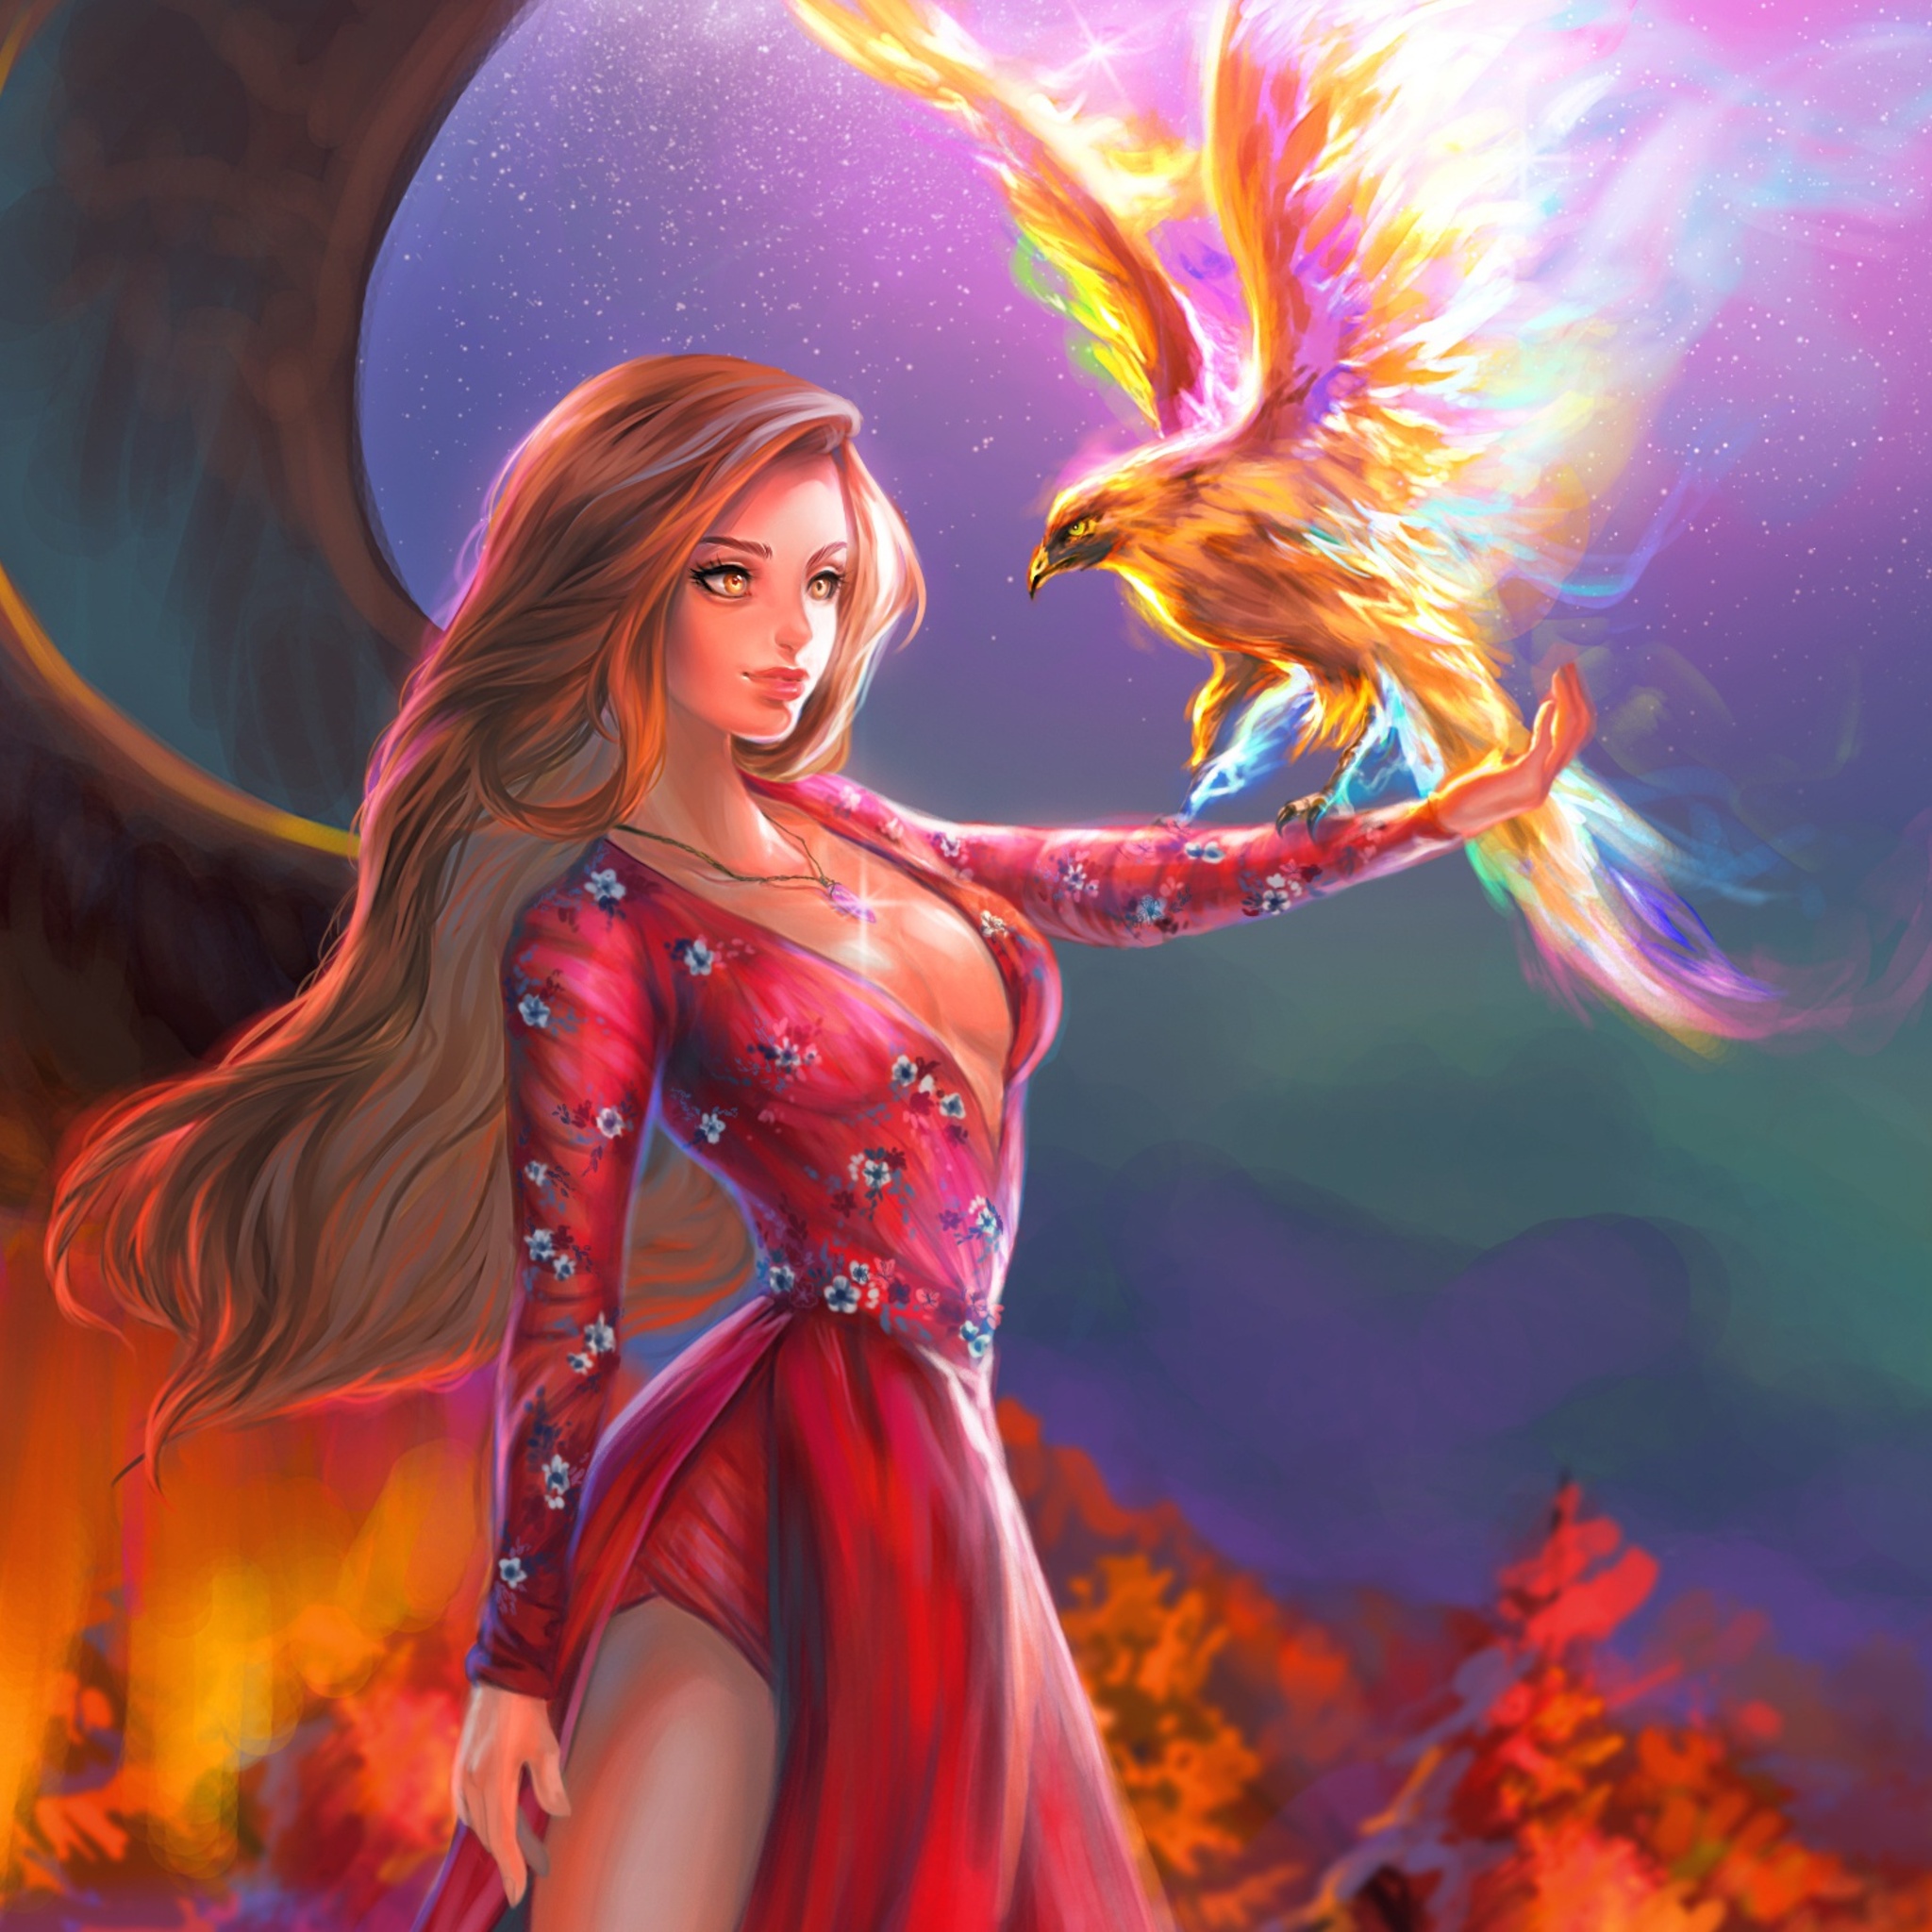 Fantasy Girl With Phoenix In 2048x2048 Resolution. fantasy-girl-with-phoeni...